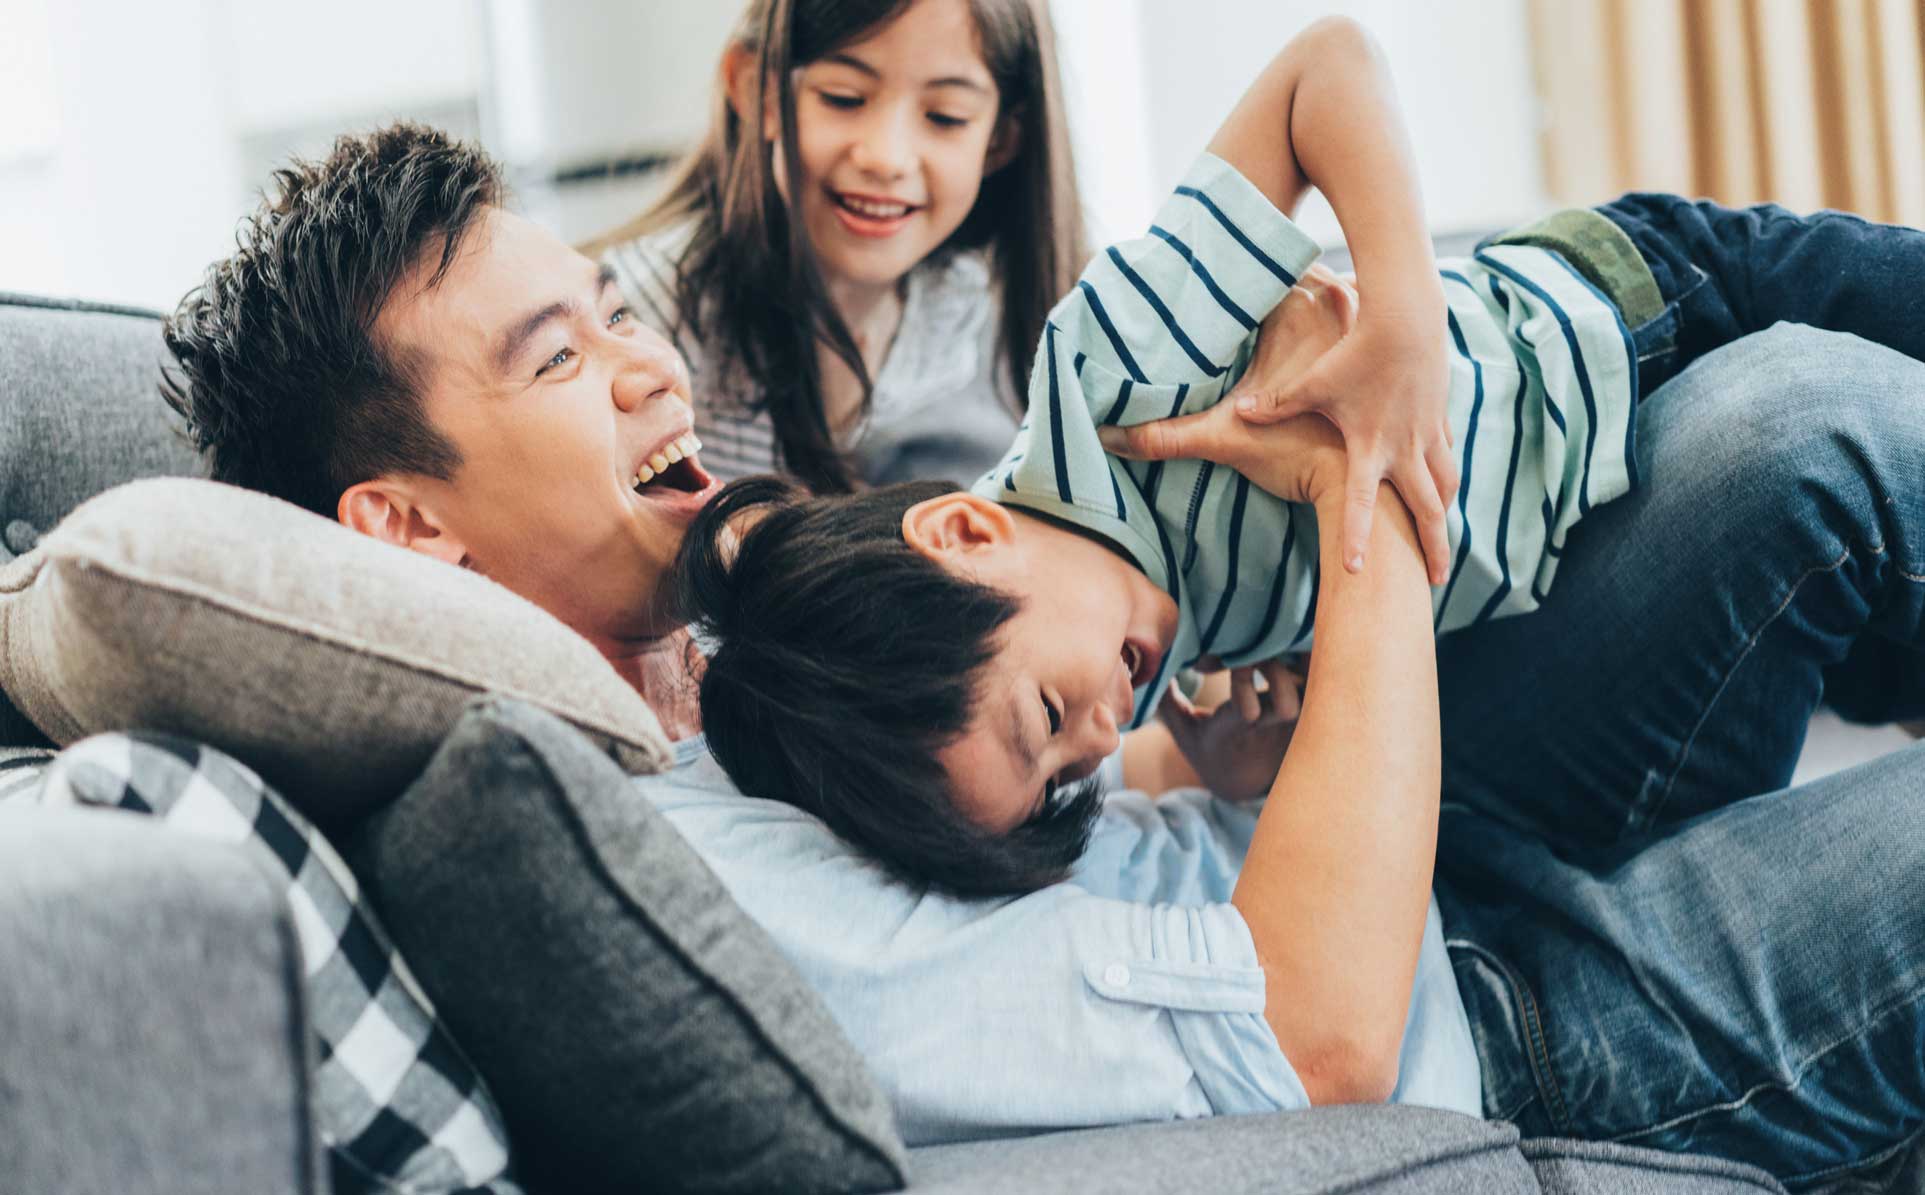 Dad tickling son on couch, daughter in background smiling